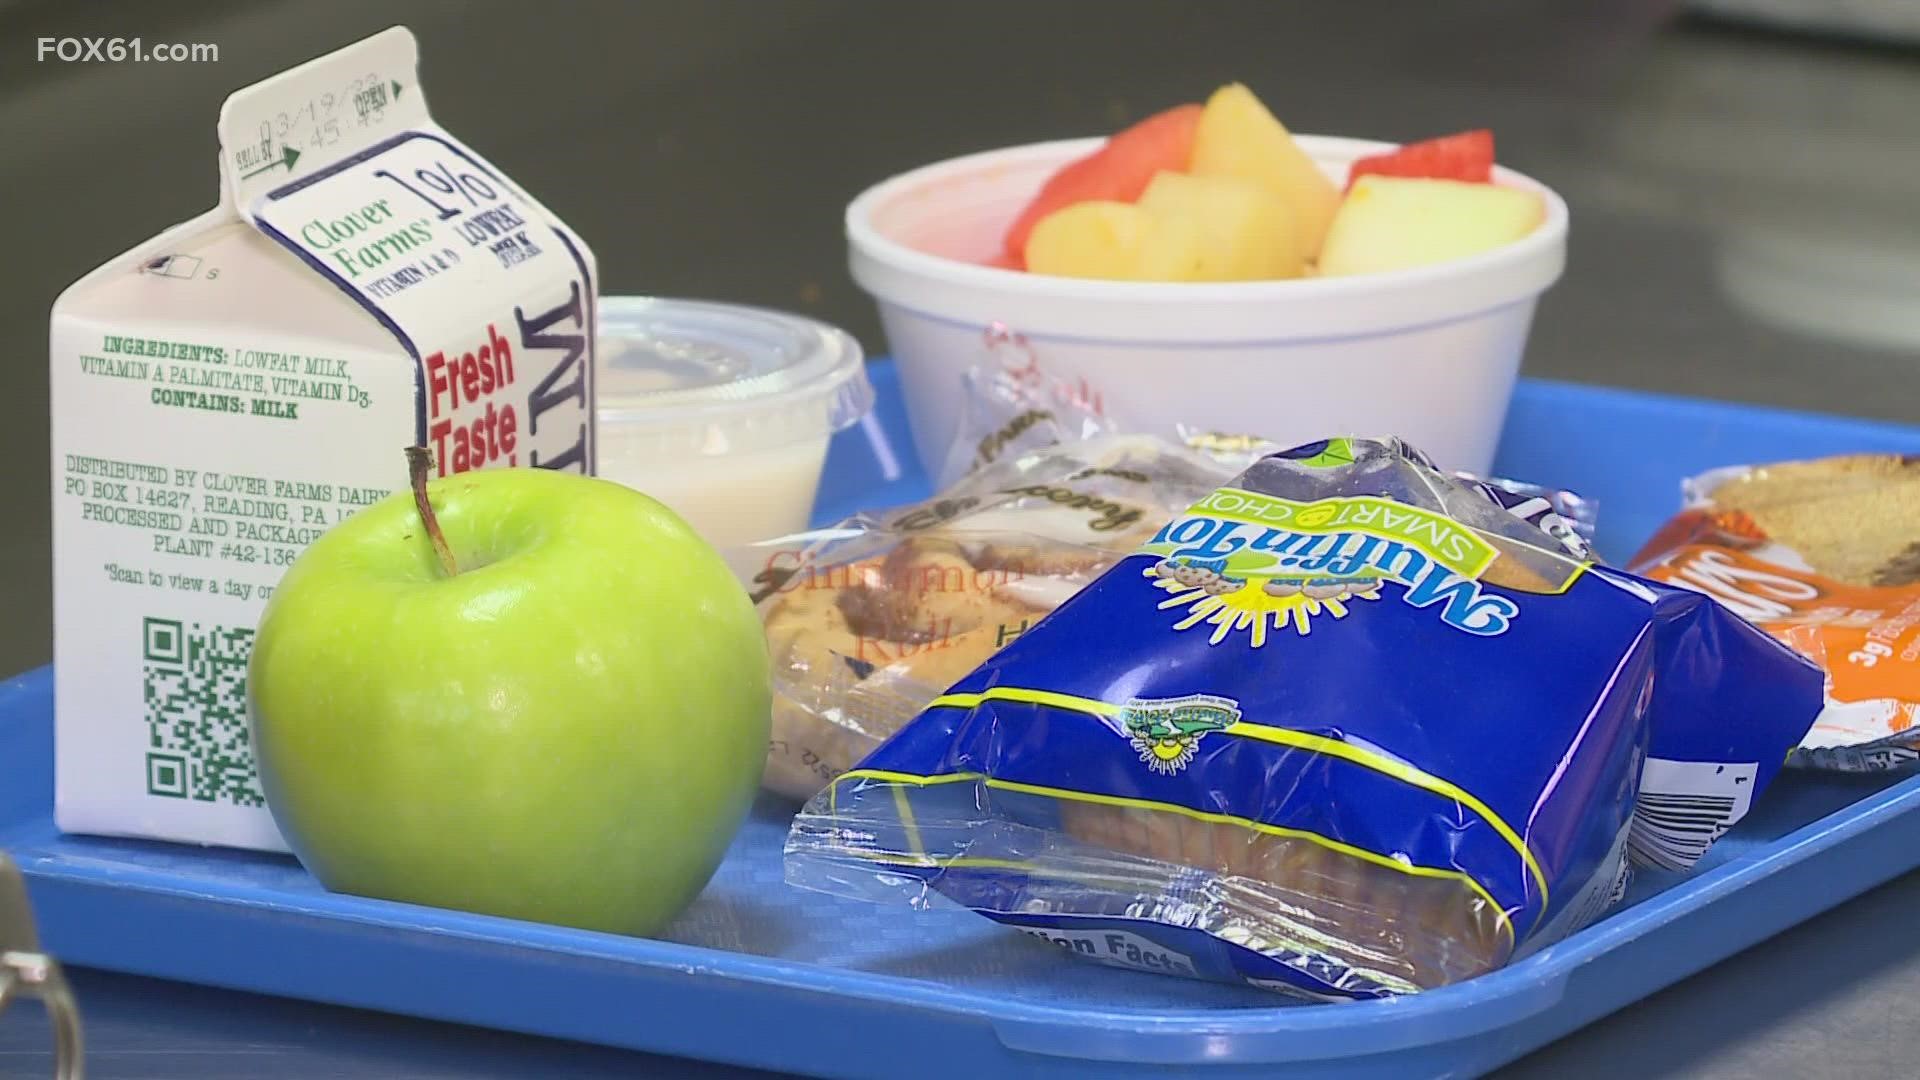 Free and reduced meal funding will be ending in June and it has the administration worried